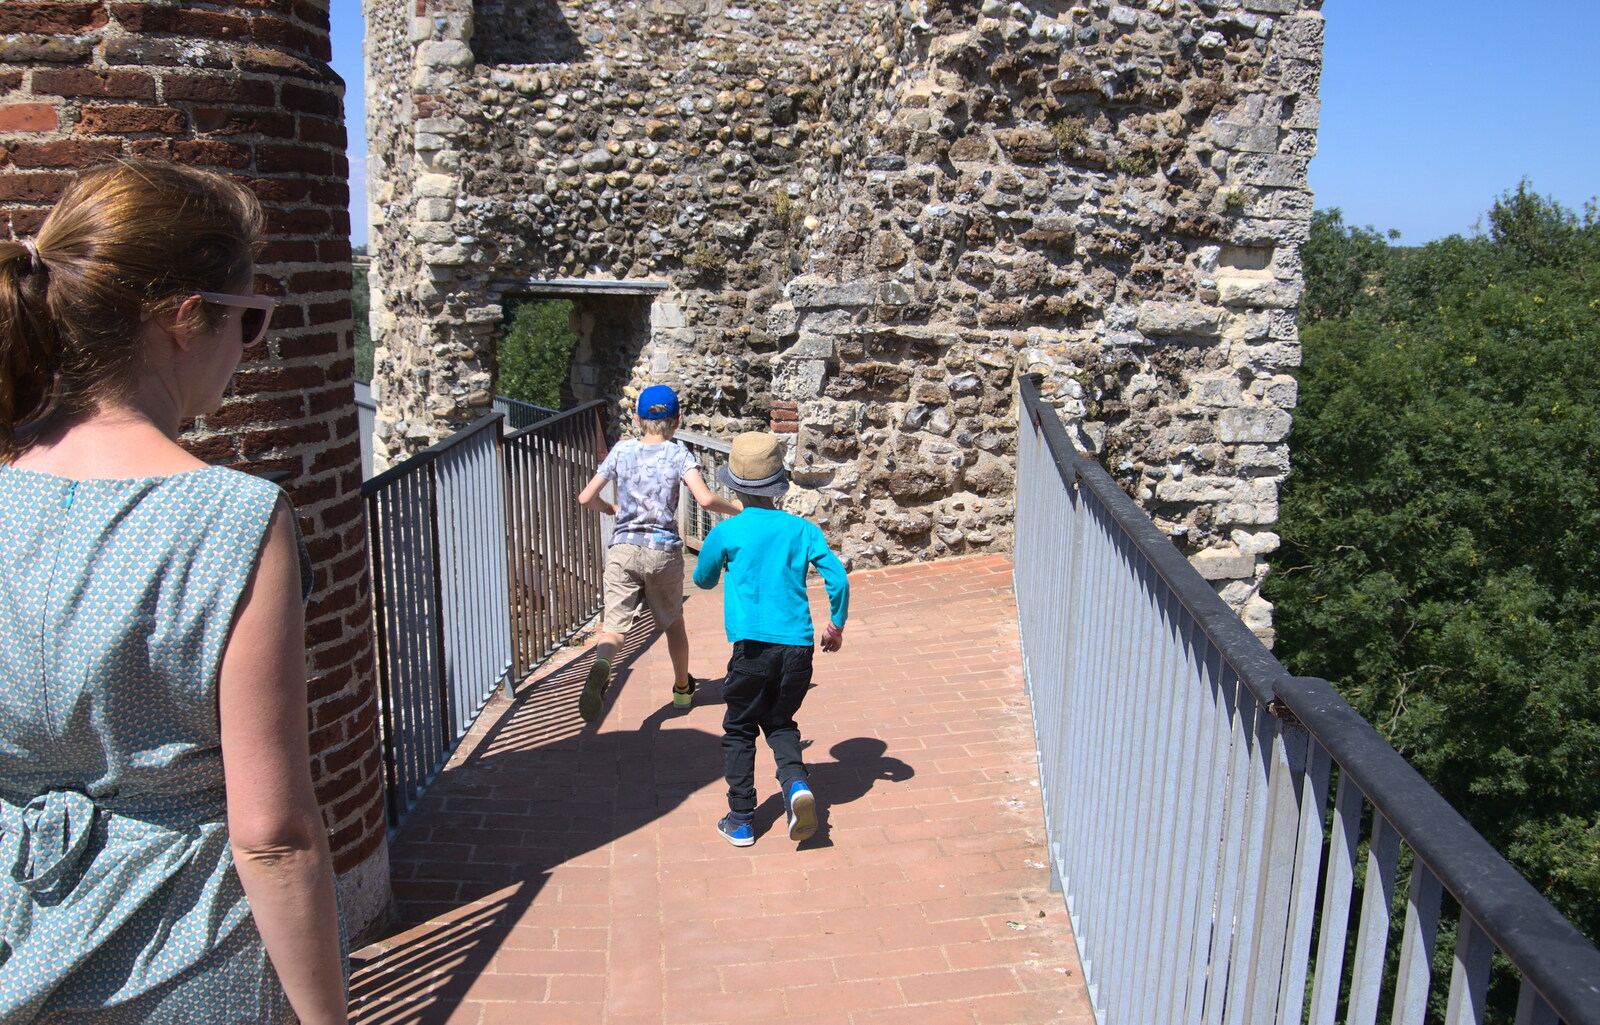 The boys run around on the ramparts from A Postcard from the Castle on the Hill, Framlingham, Suffolk - 14th July 2018